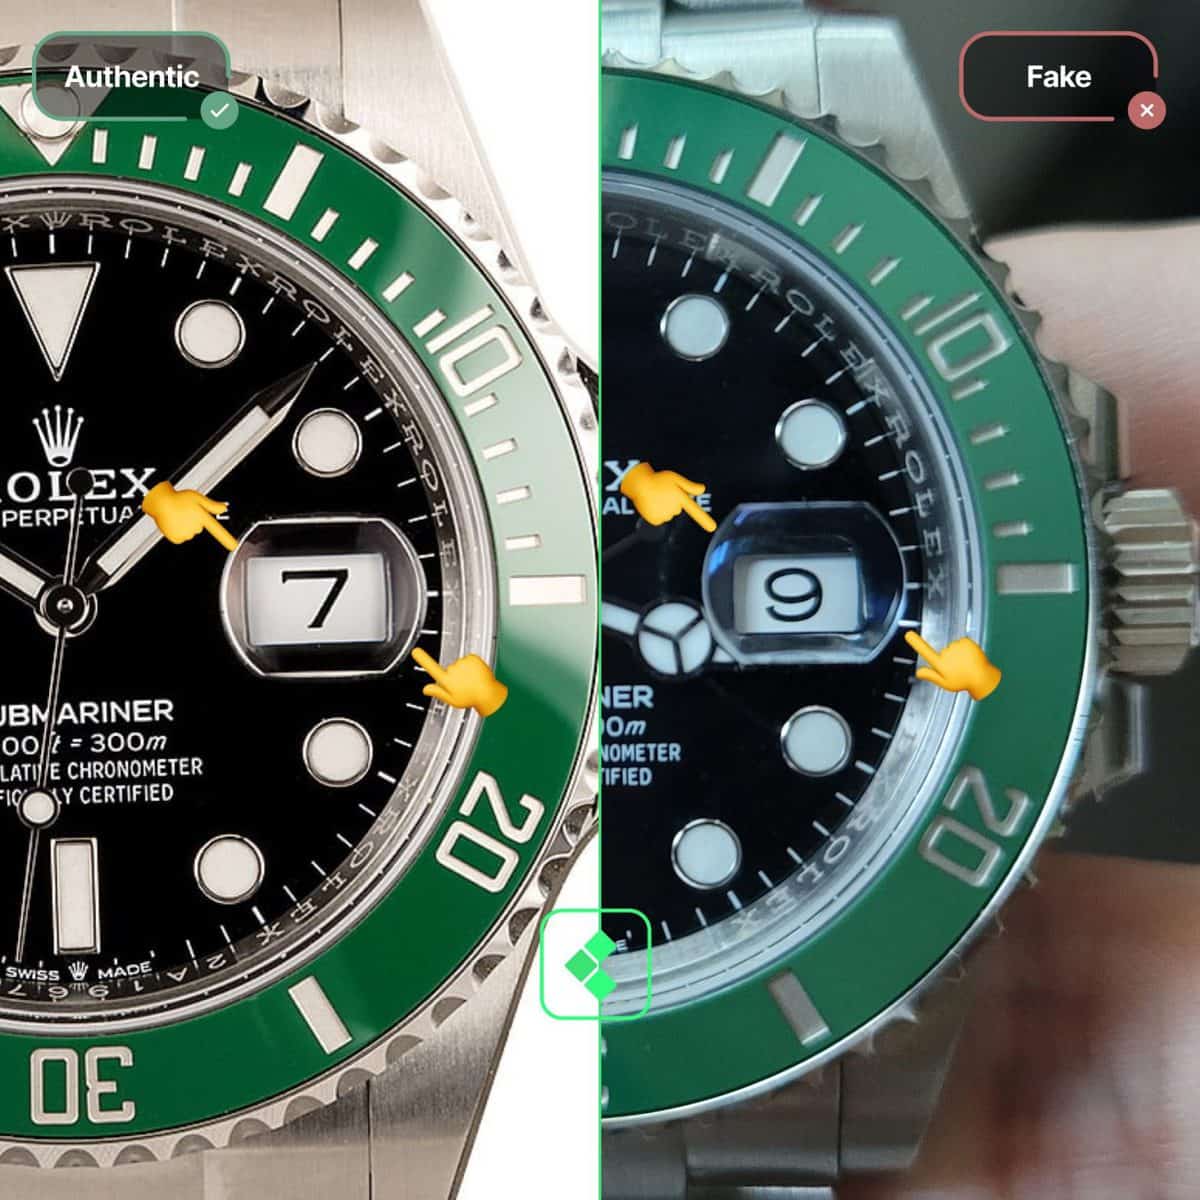 2020+ Submariner: How To Spot A Fake Rolex 126610